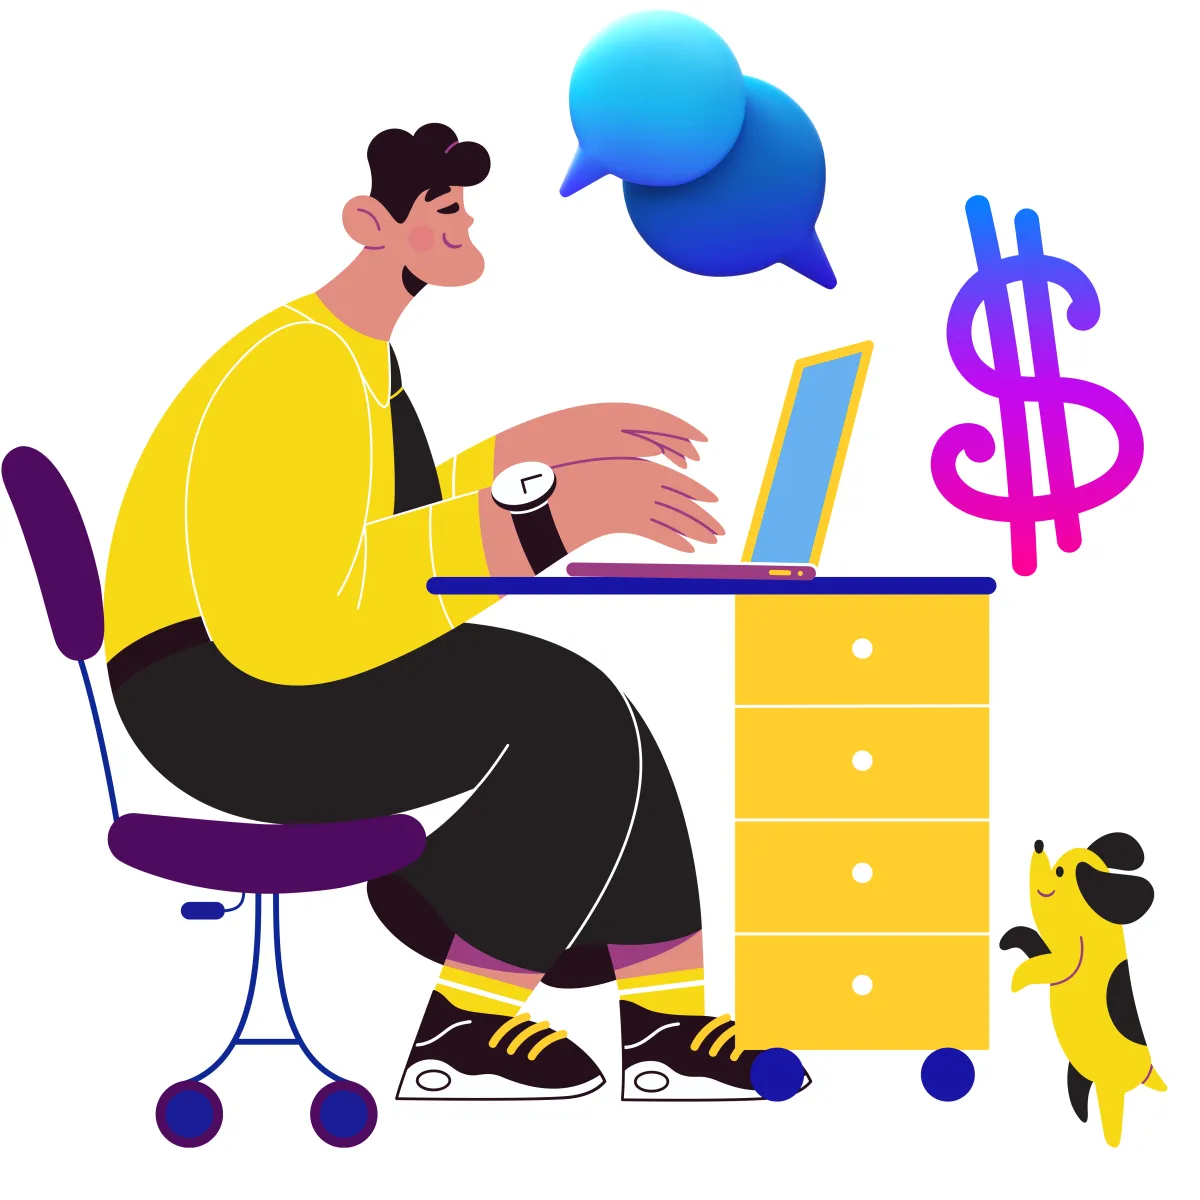 Turn SMS, IM's & Chats Into Revenue